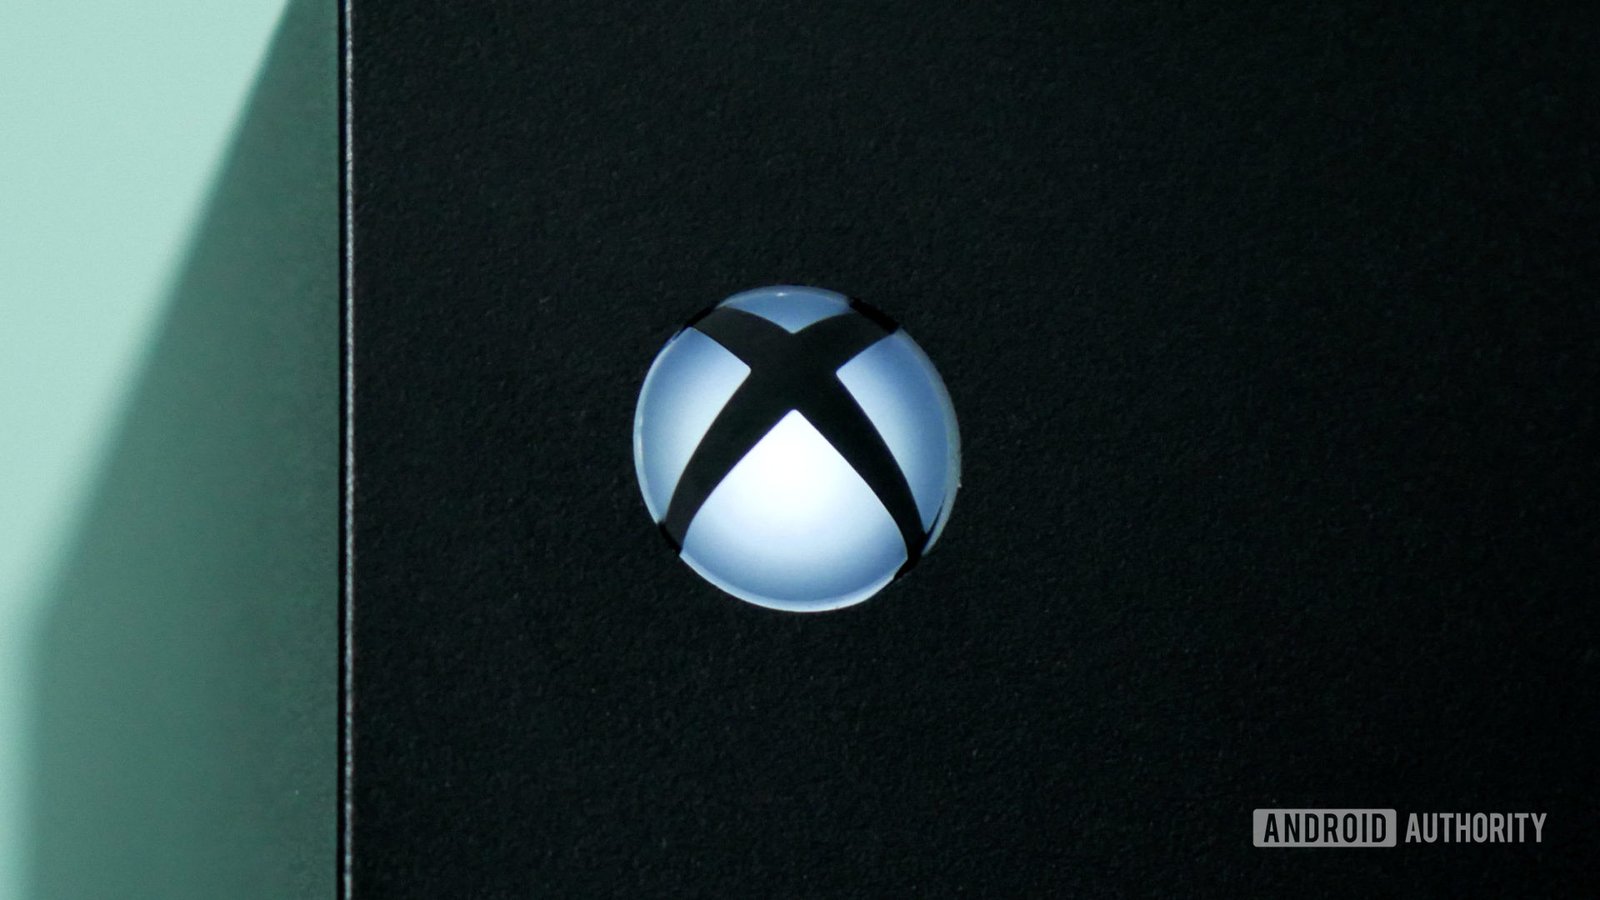 Microsoft wants its next Xbox to have the ‘largest technical leap’ ever